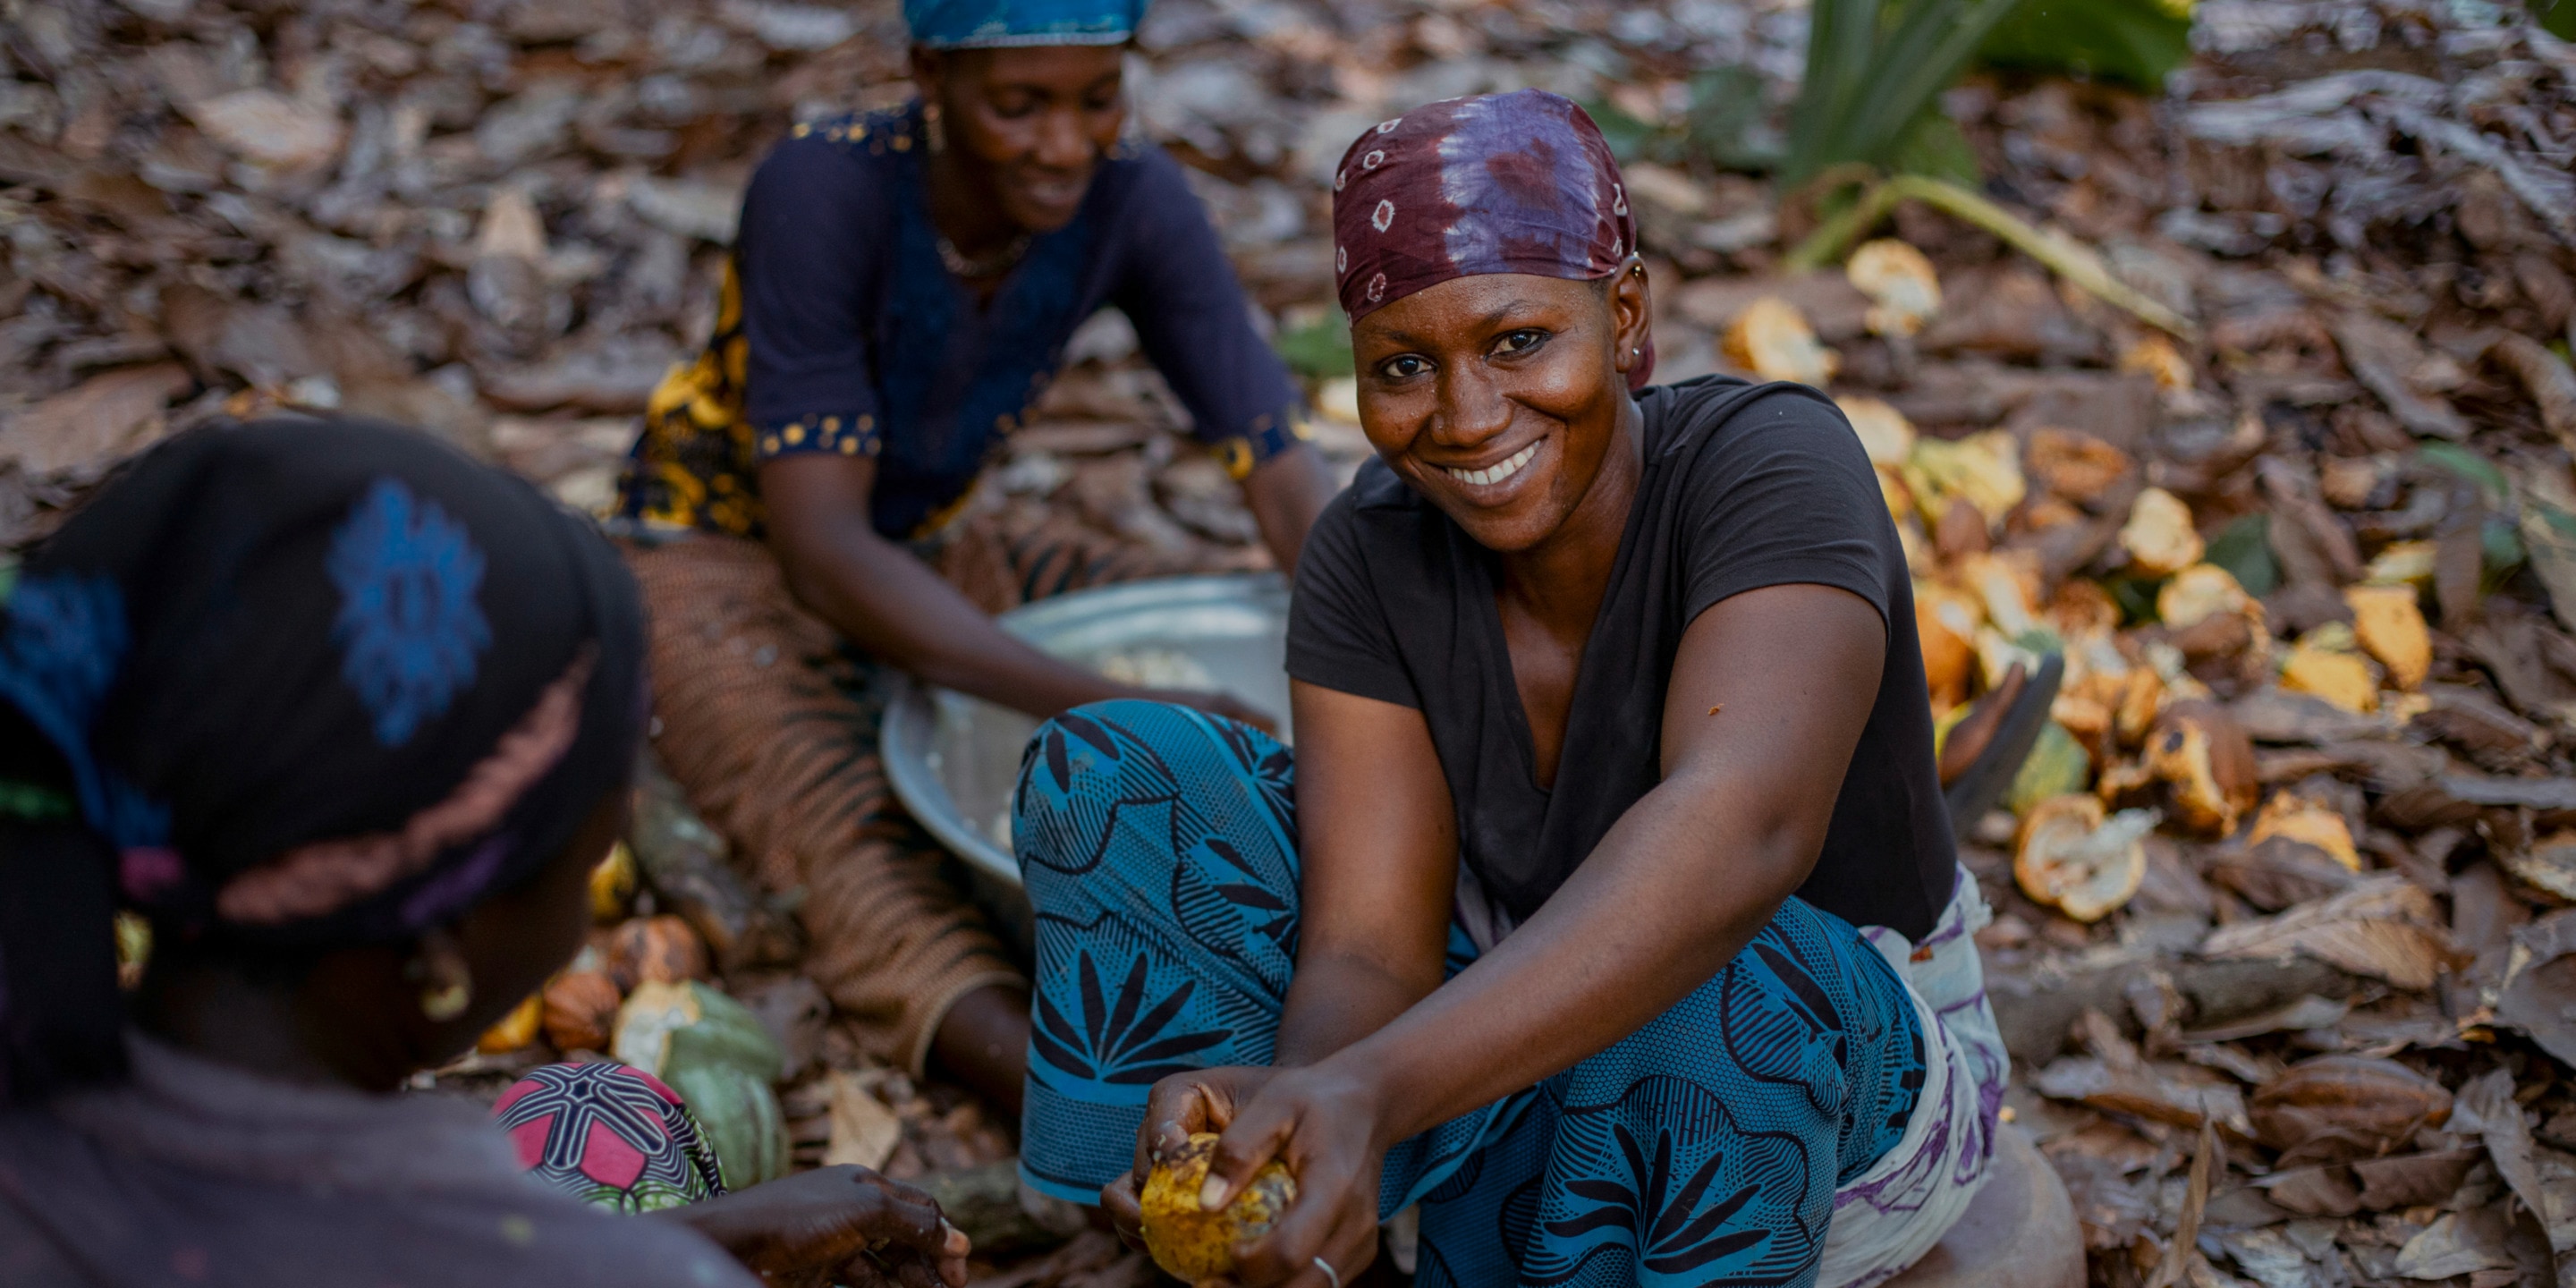 Group of Smiling women from the cocoa farming community sitting down in a plantation